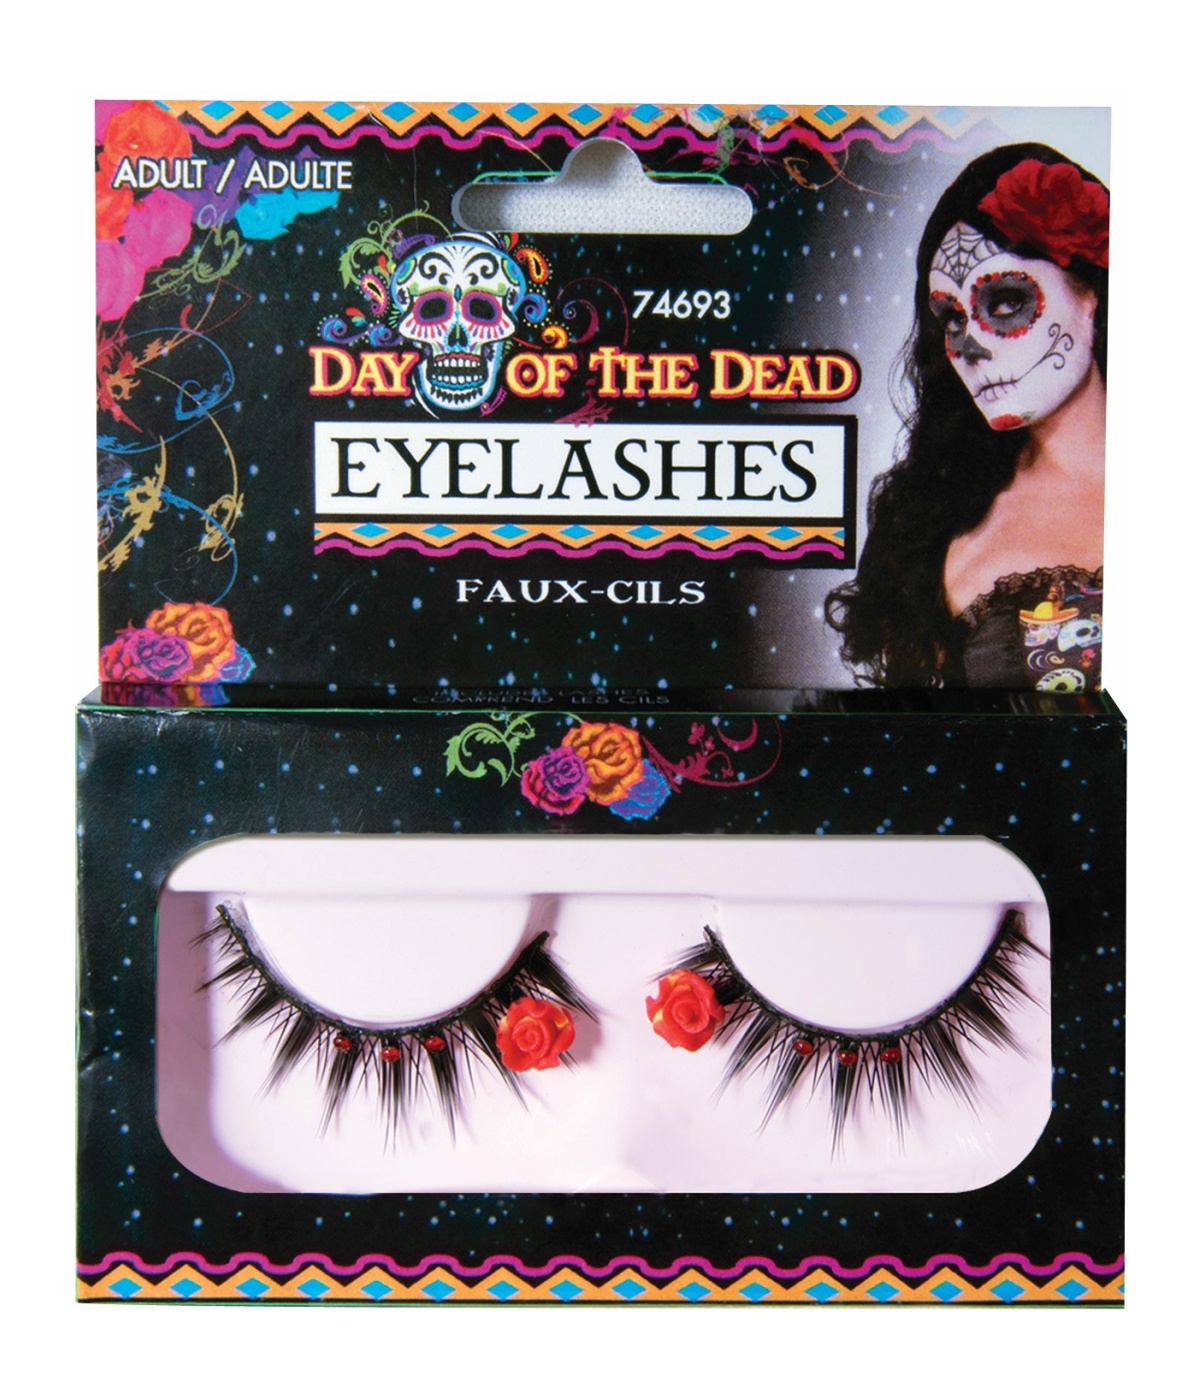  Day of the Dead Eyelashes Red Roses